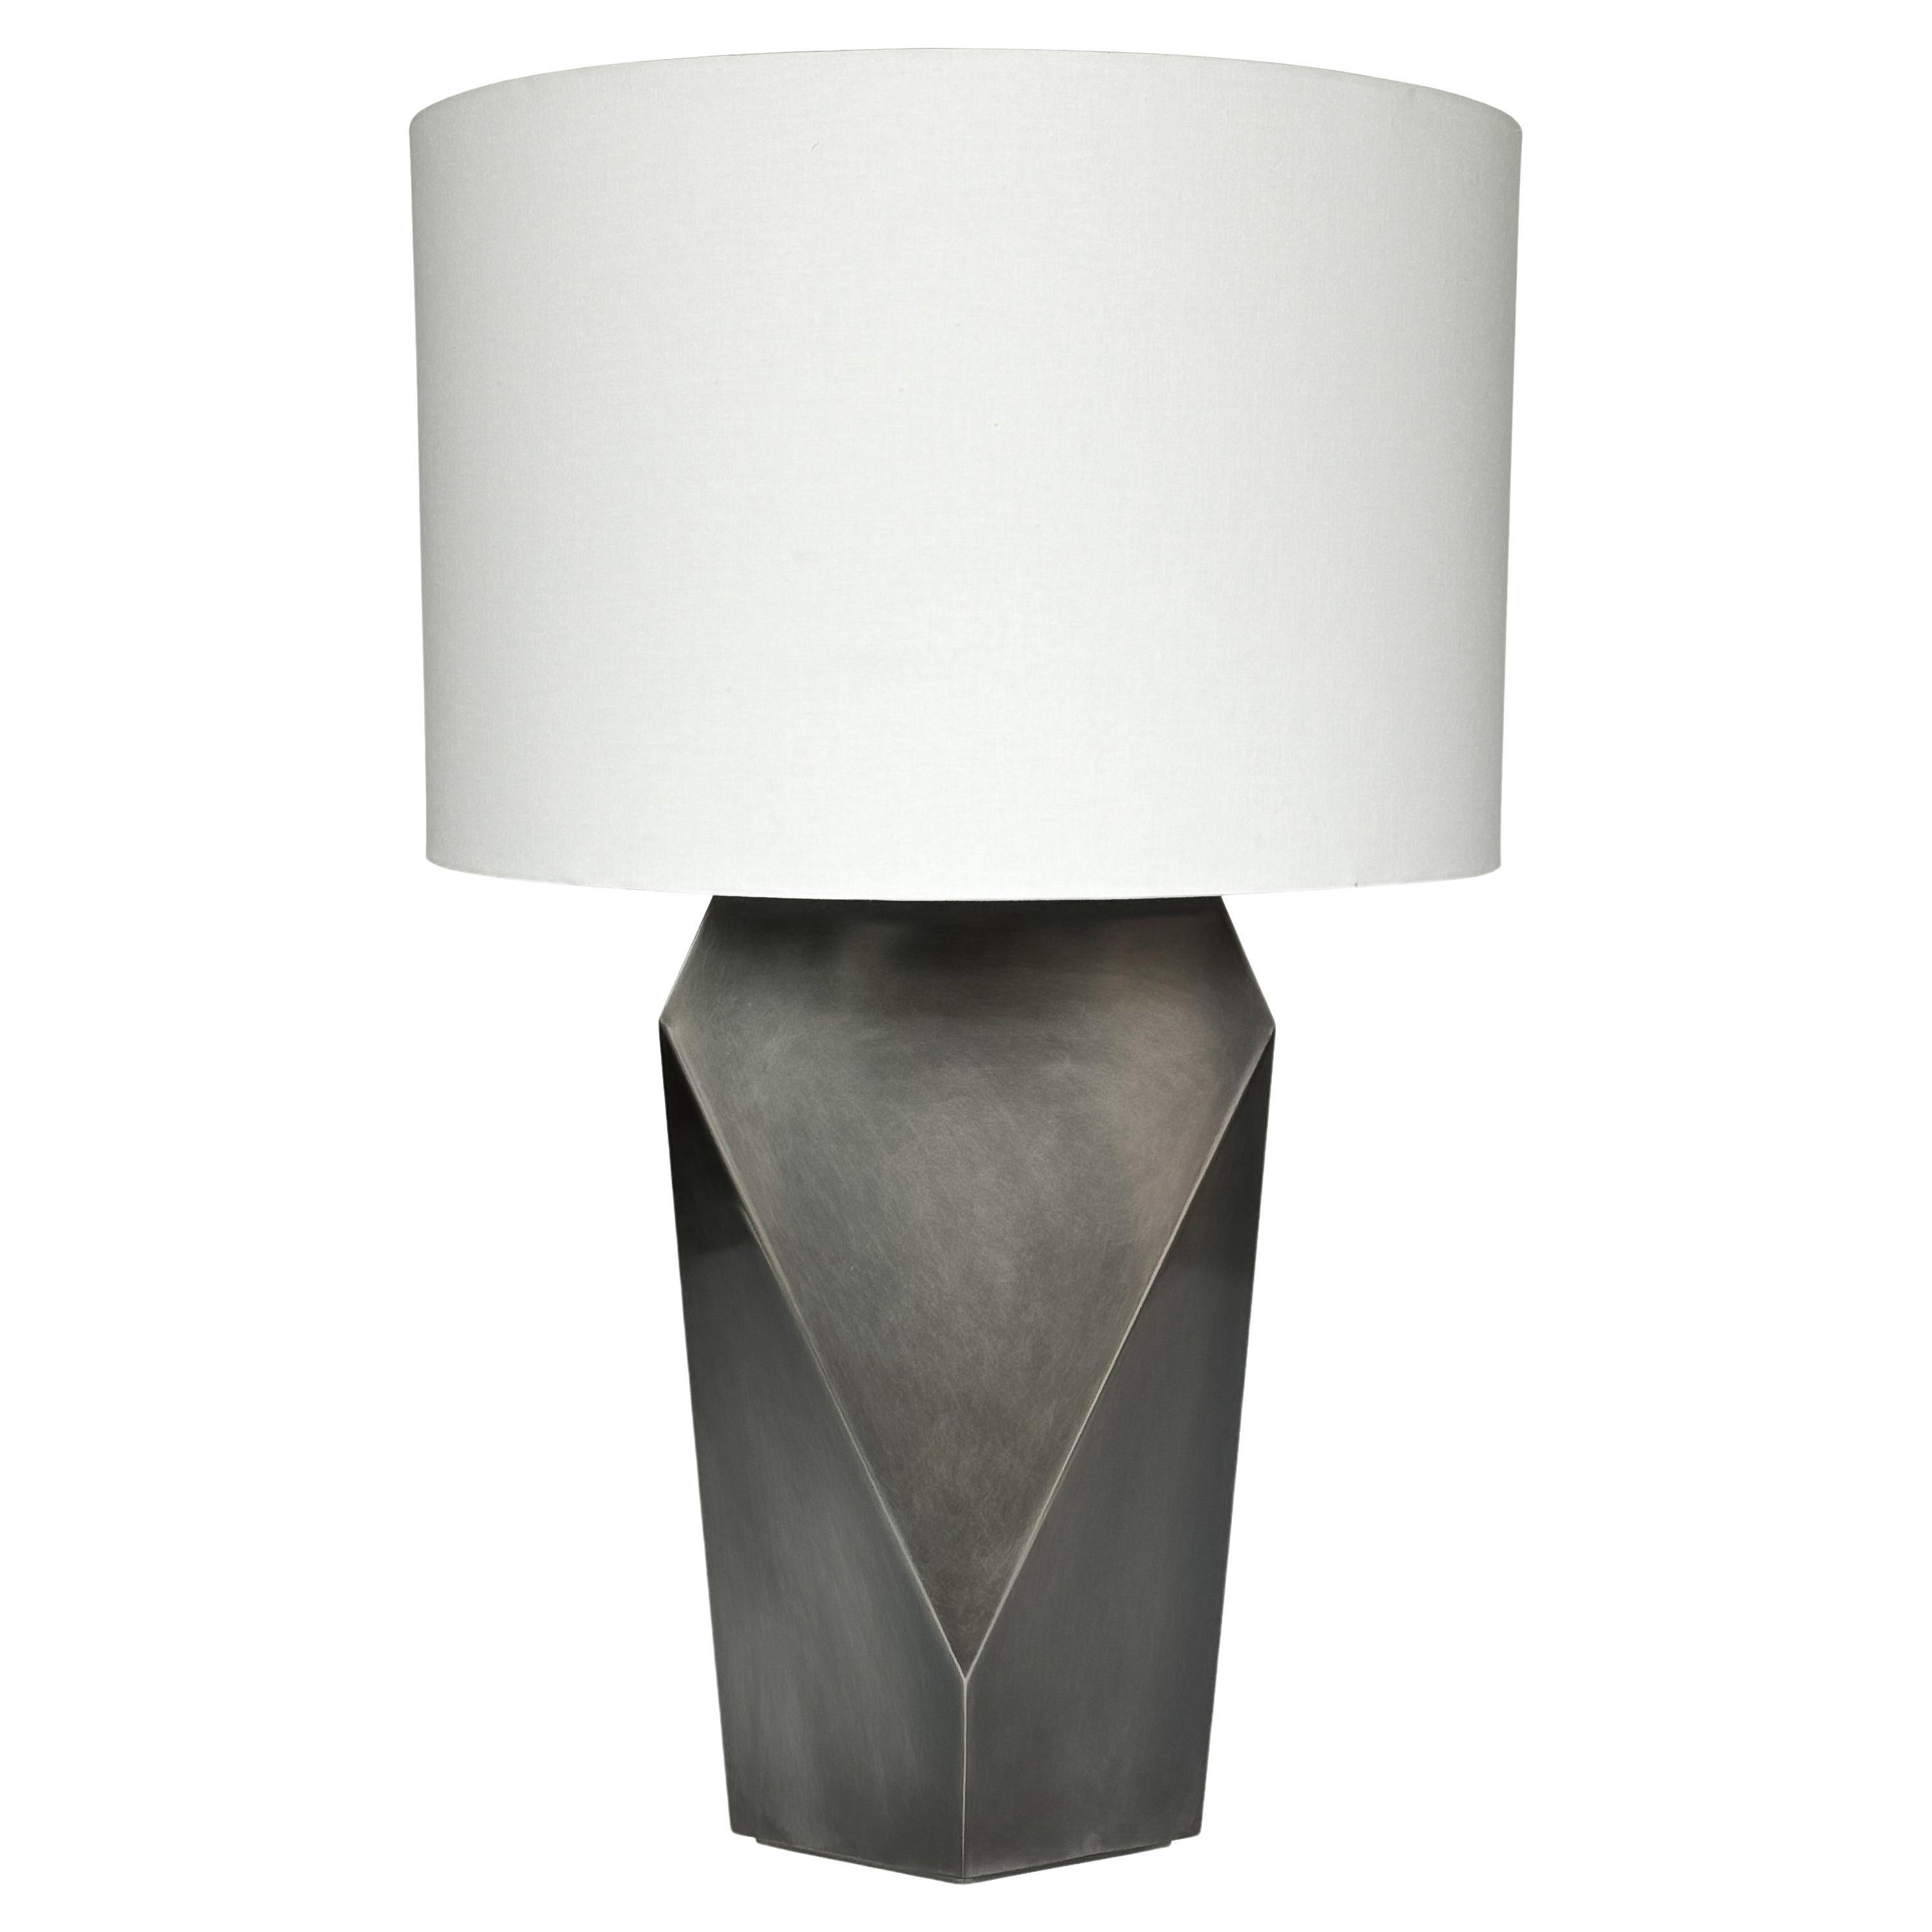 Donghia Origami Temko Table Lamp For Sale